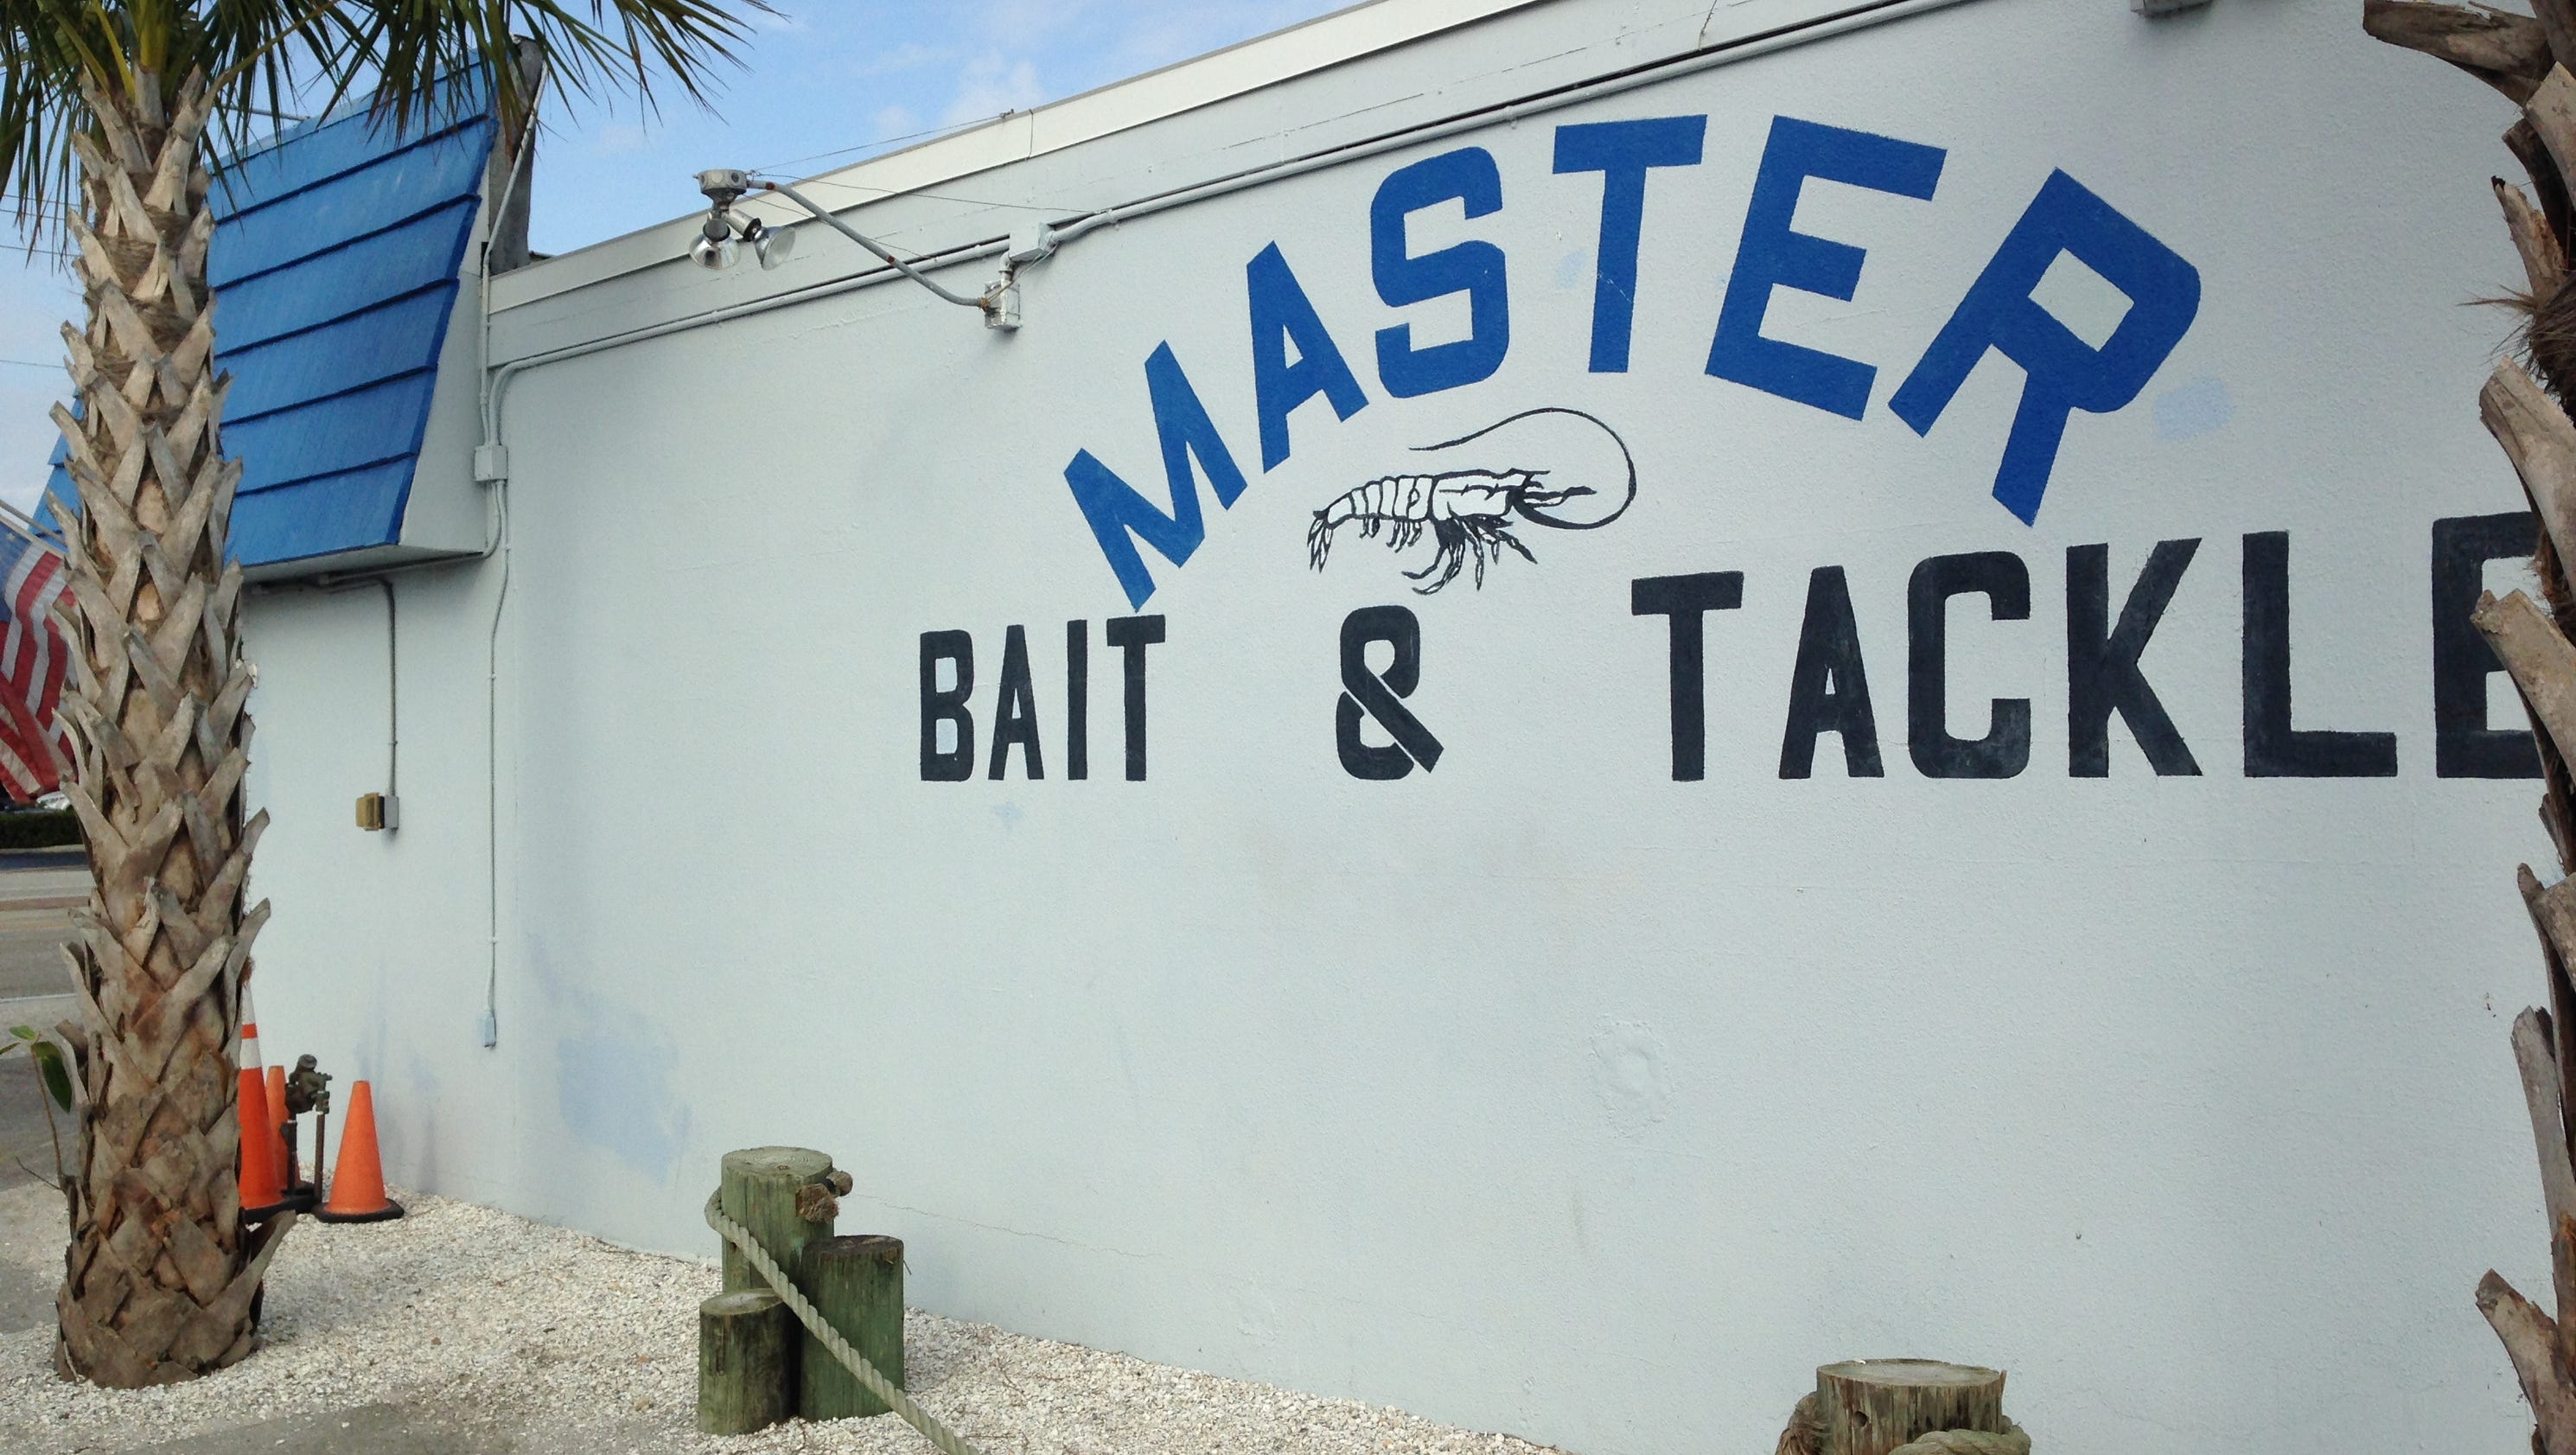 Florida Bait Shop Shocks Some With Its Raunchy Name 